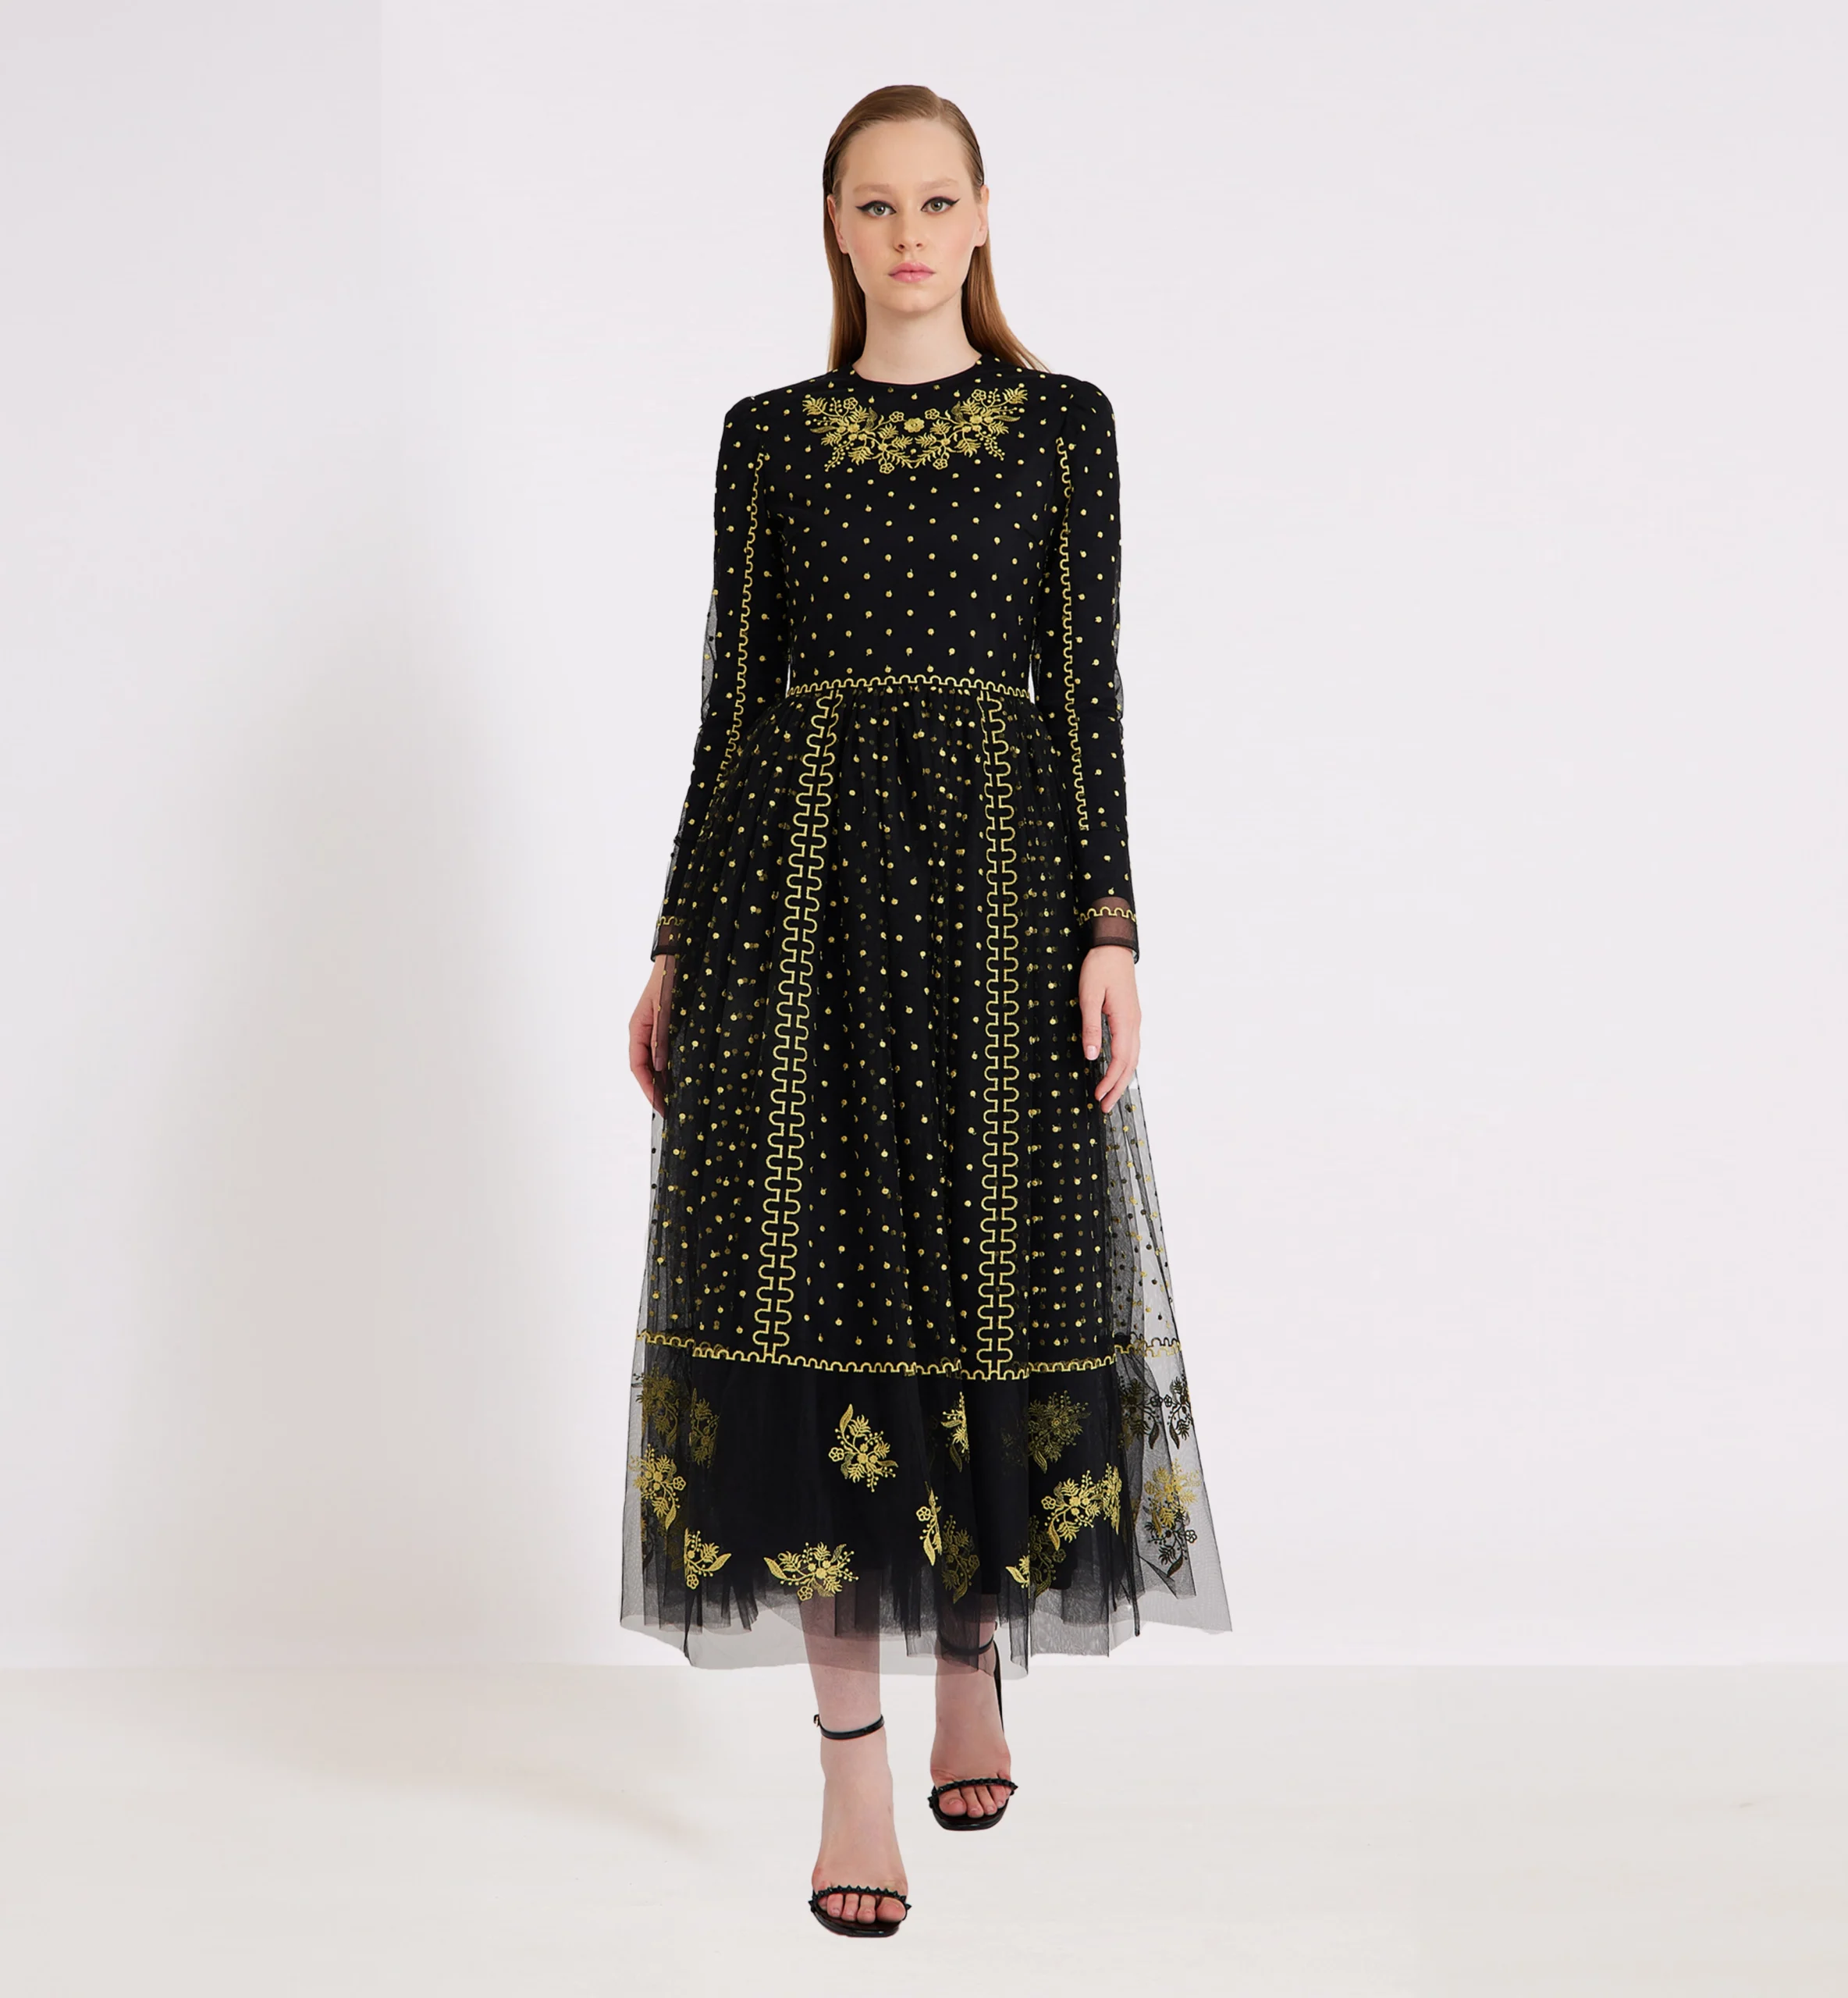 Embroidered dots, flowers and lines on mesh midi dress, yellow